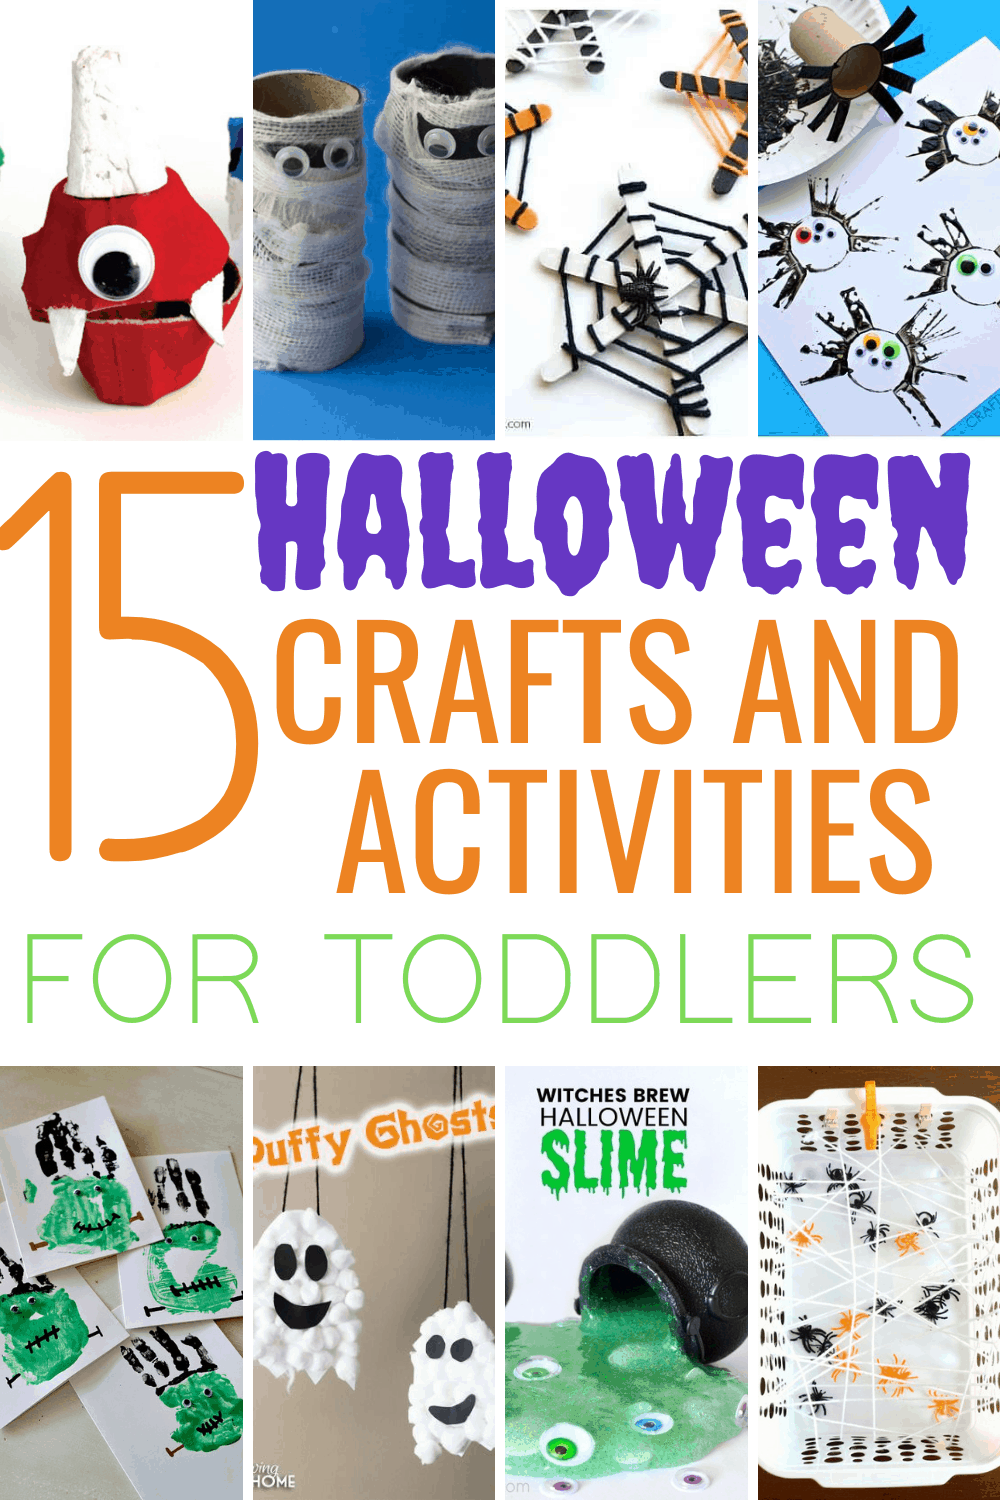 15 Fun Fall Kid Crafts - Our Kid Things